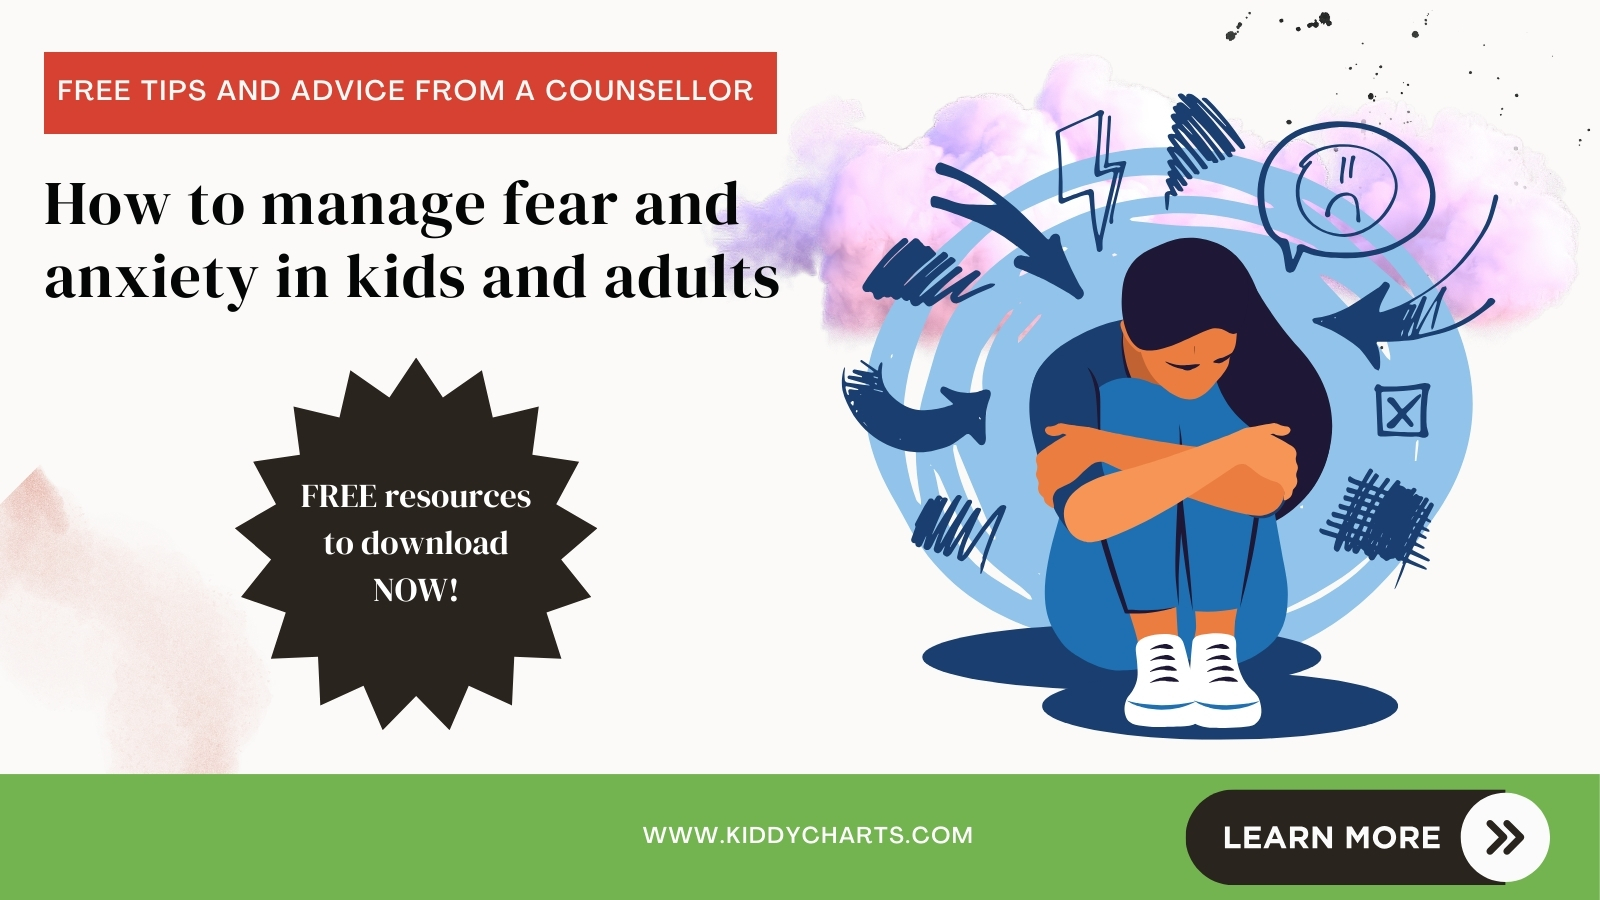 A brief help guide on how to manage fear and anxiety in kids and adults